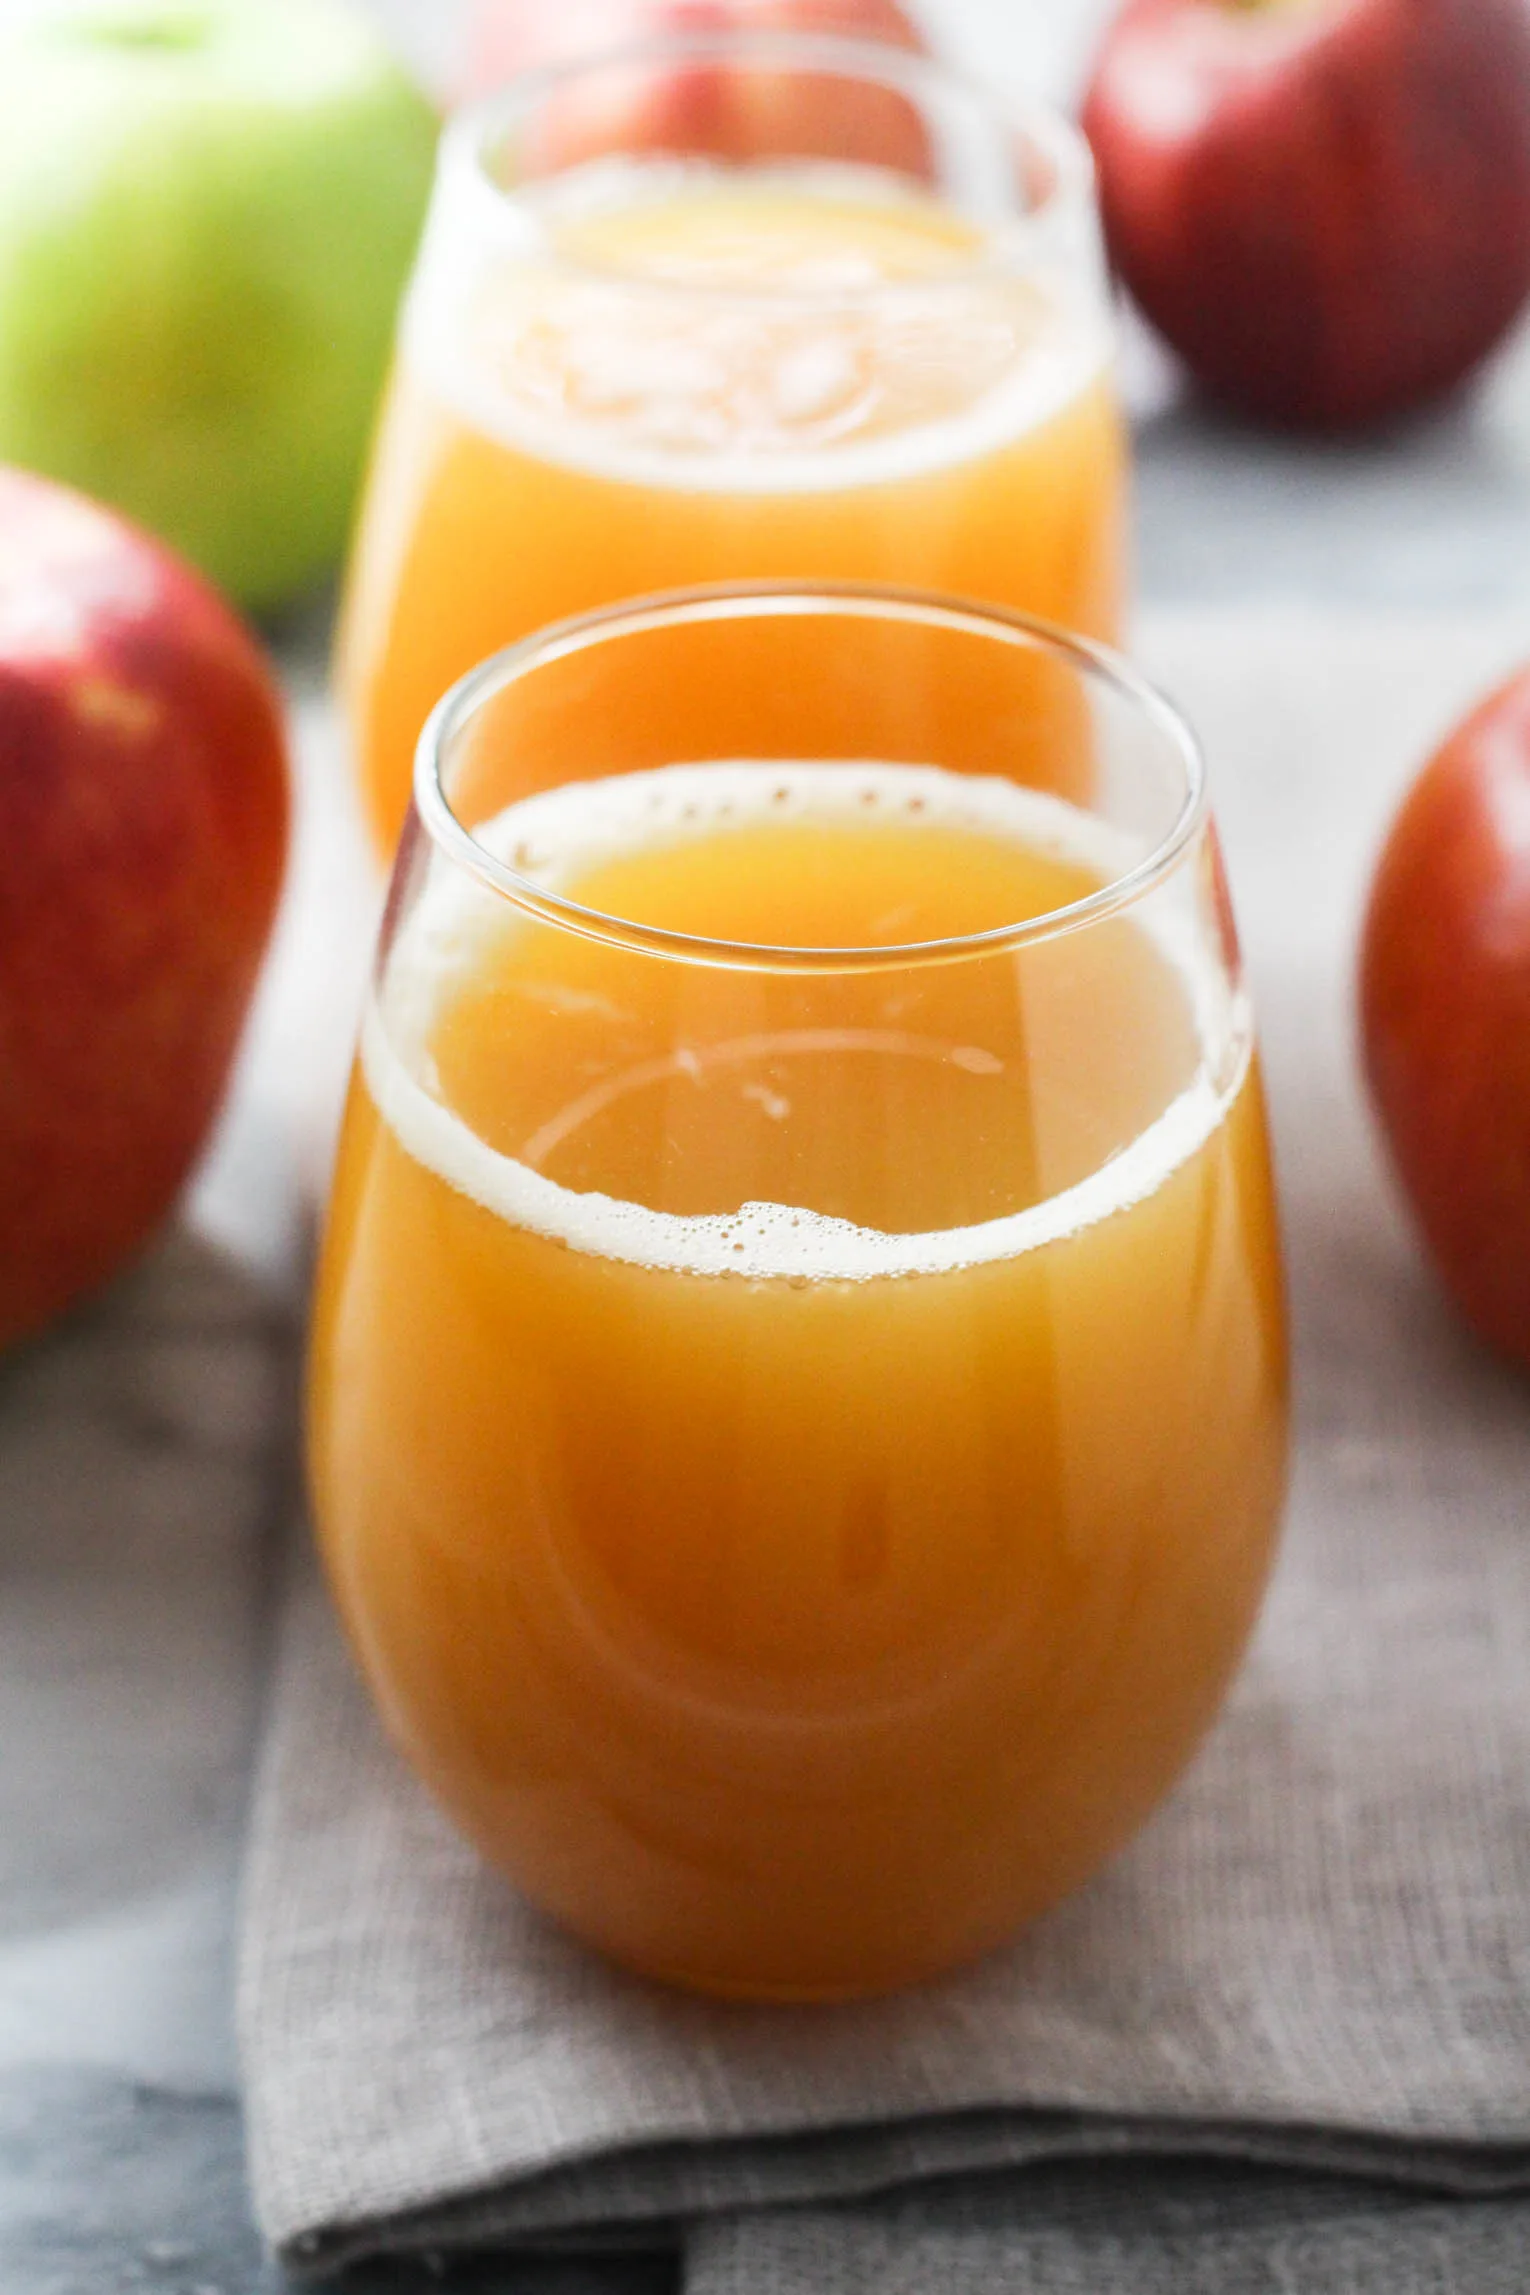 A glass of apple juice. Another glass with juice behind. Some apples in the background.